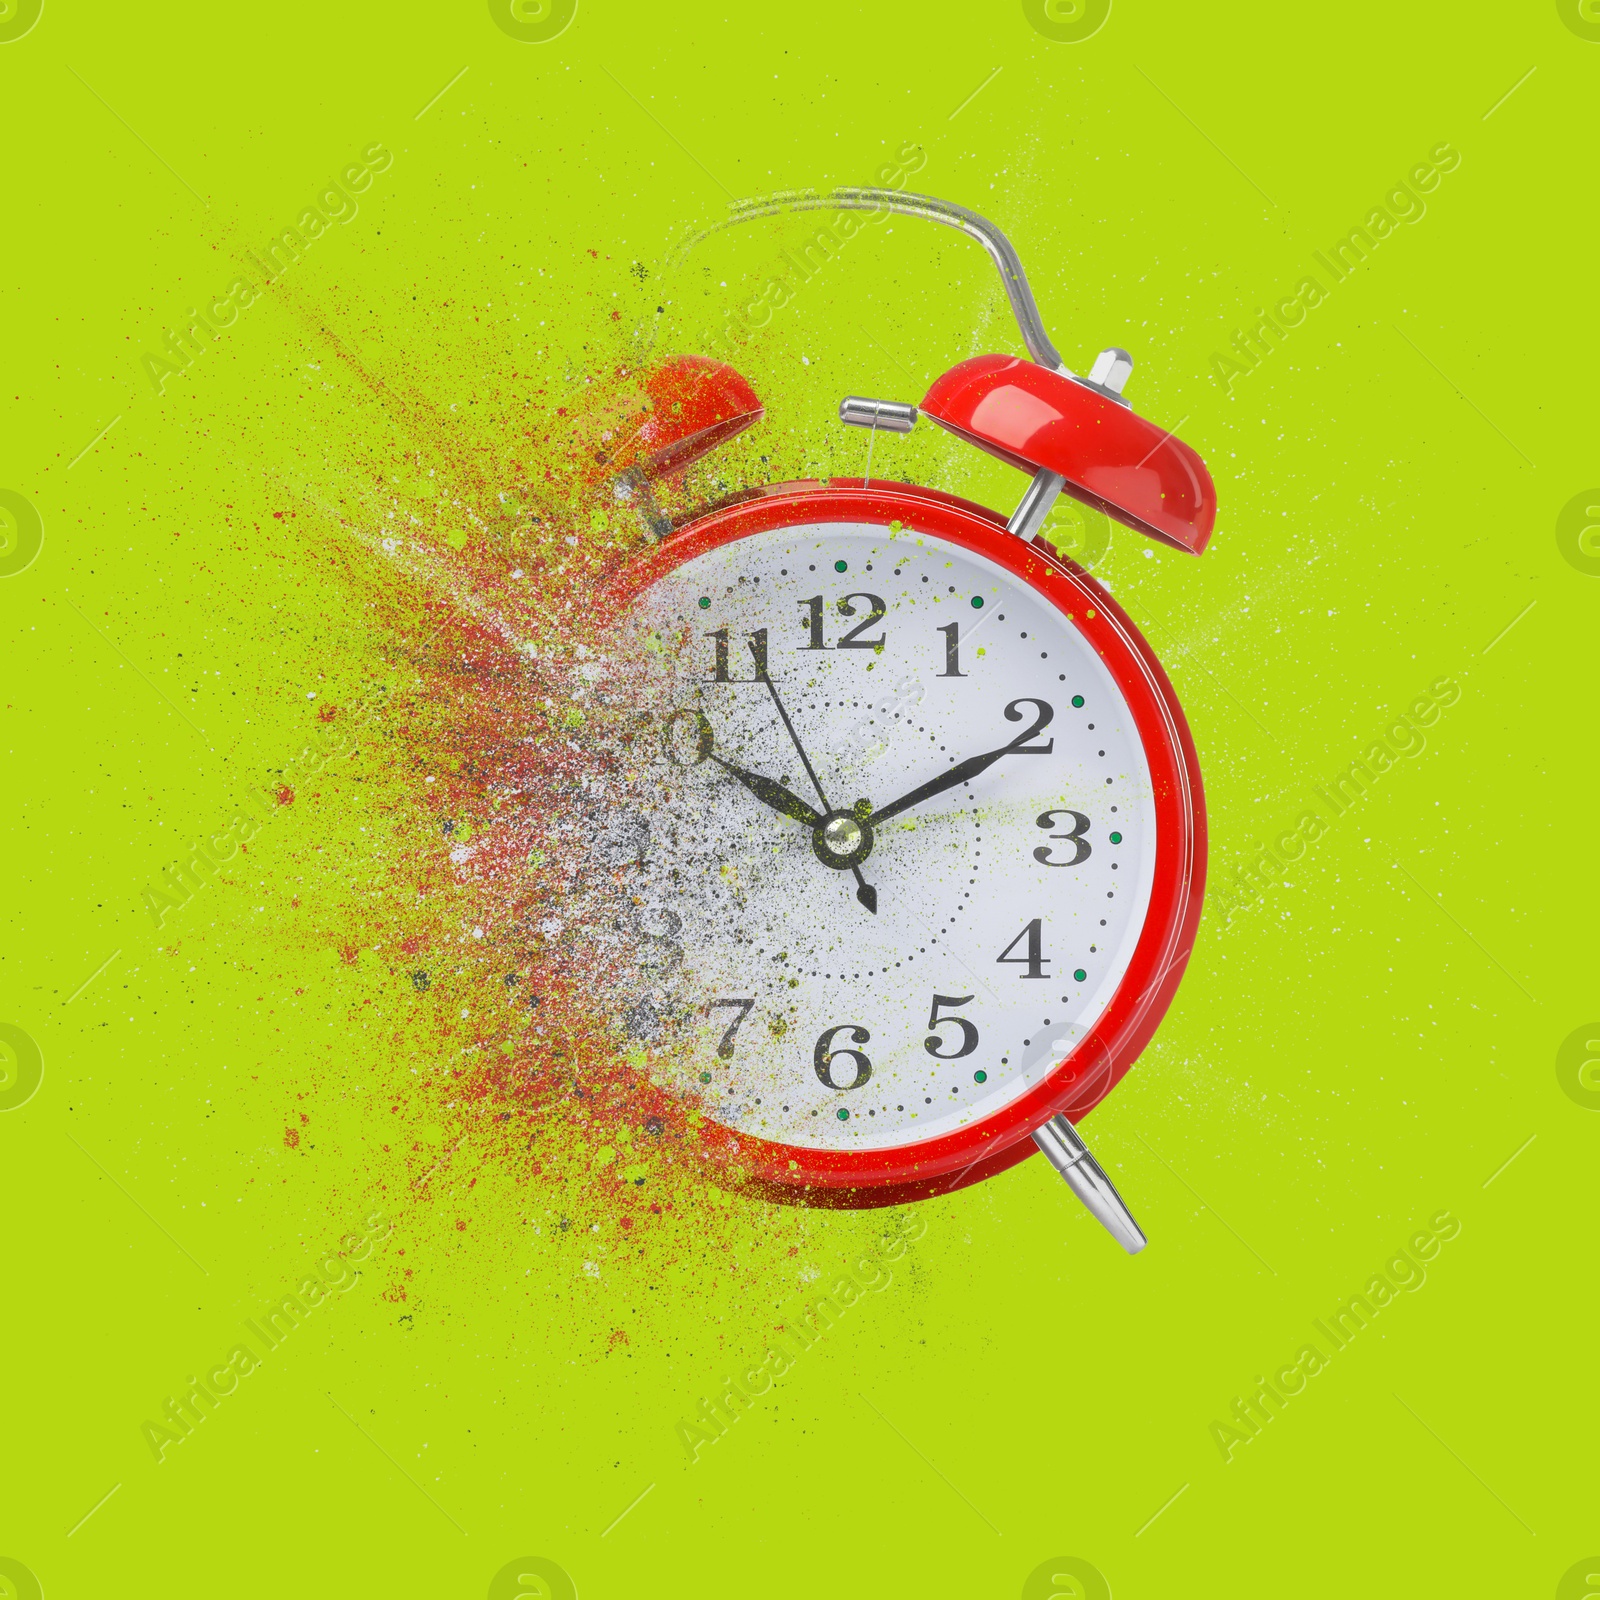 Image of Red alarm clock dissolving on green background. Flow of time